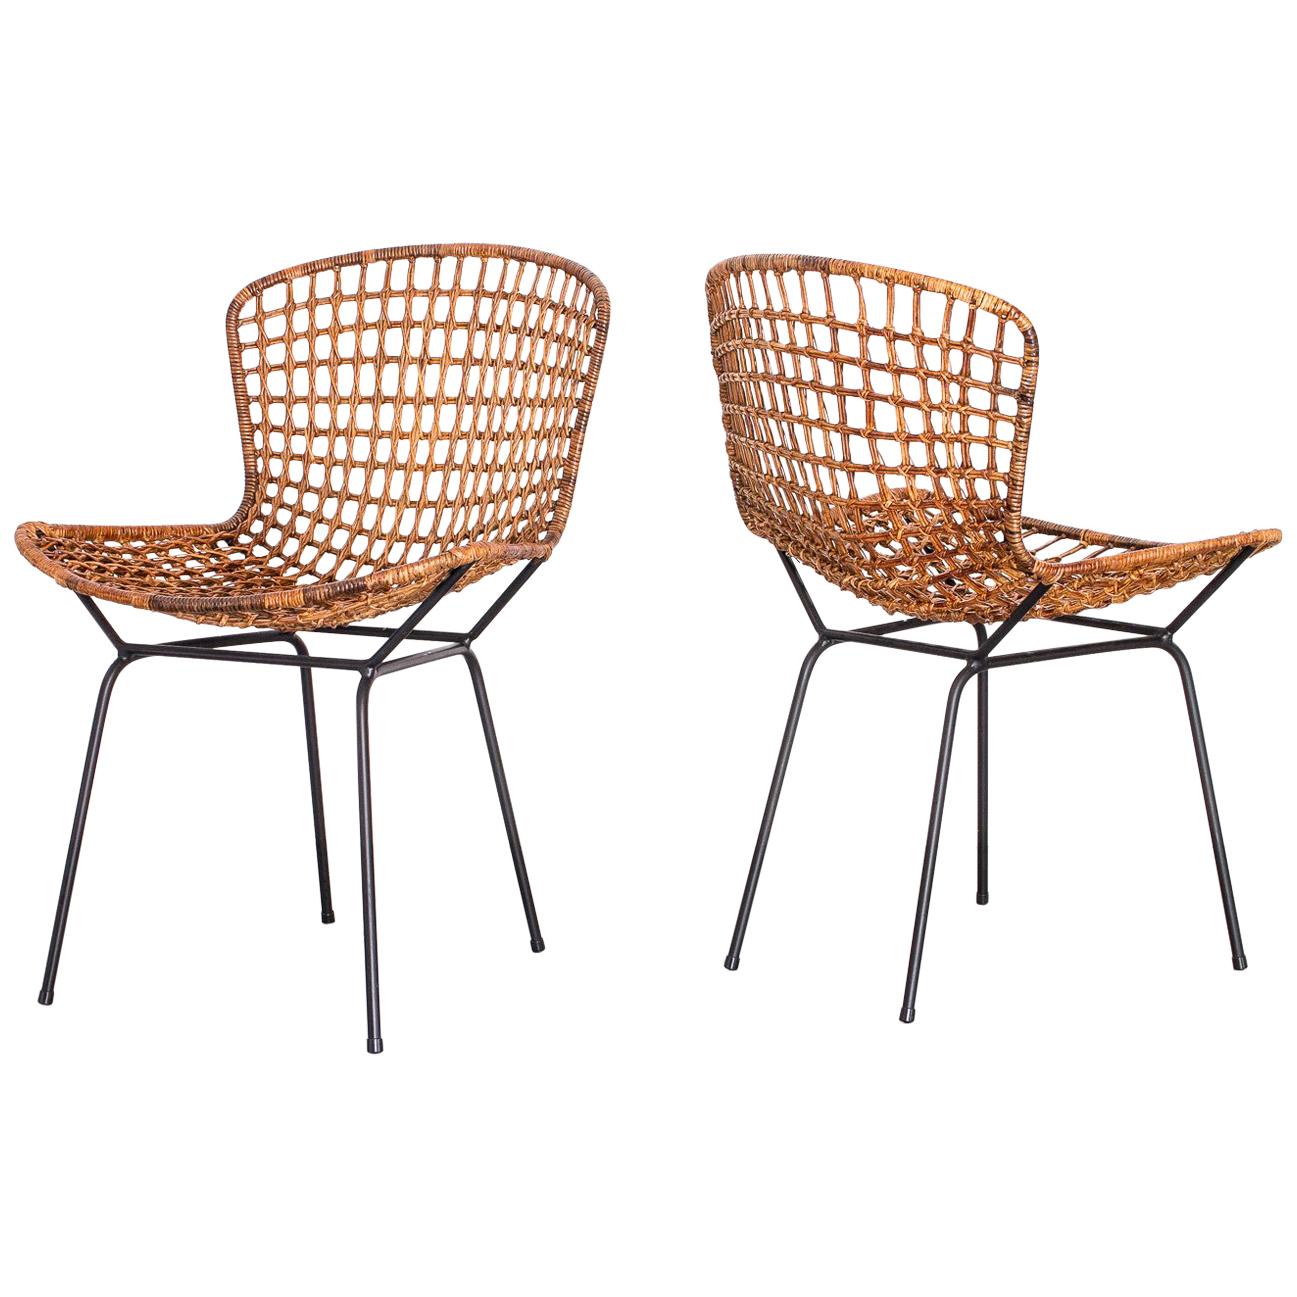 1950s Pair of Side Chairs in Iron and Reed by Carlo Hauner, Brazilian Modernism